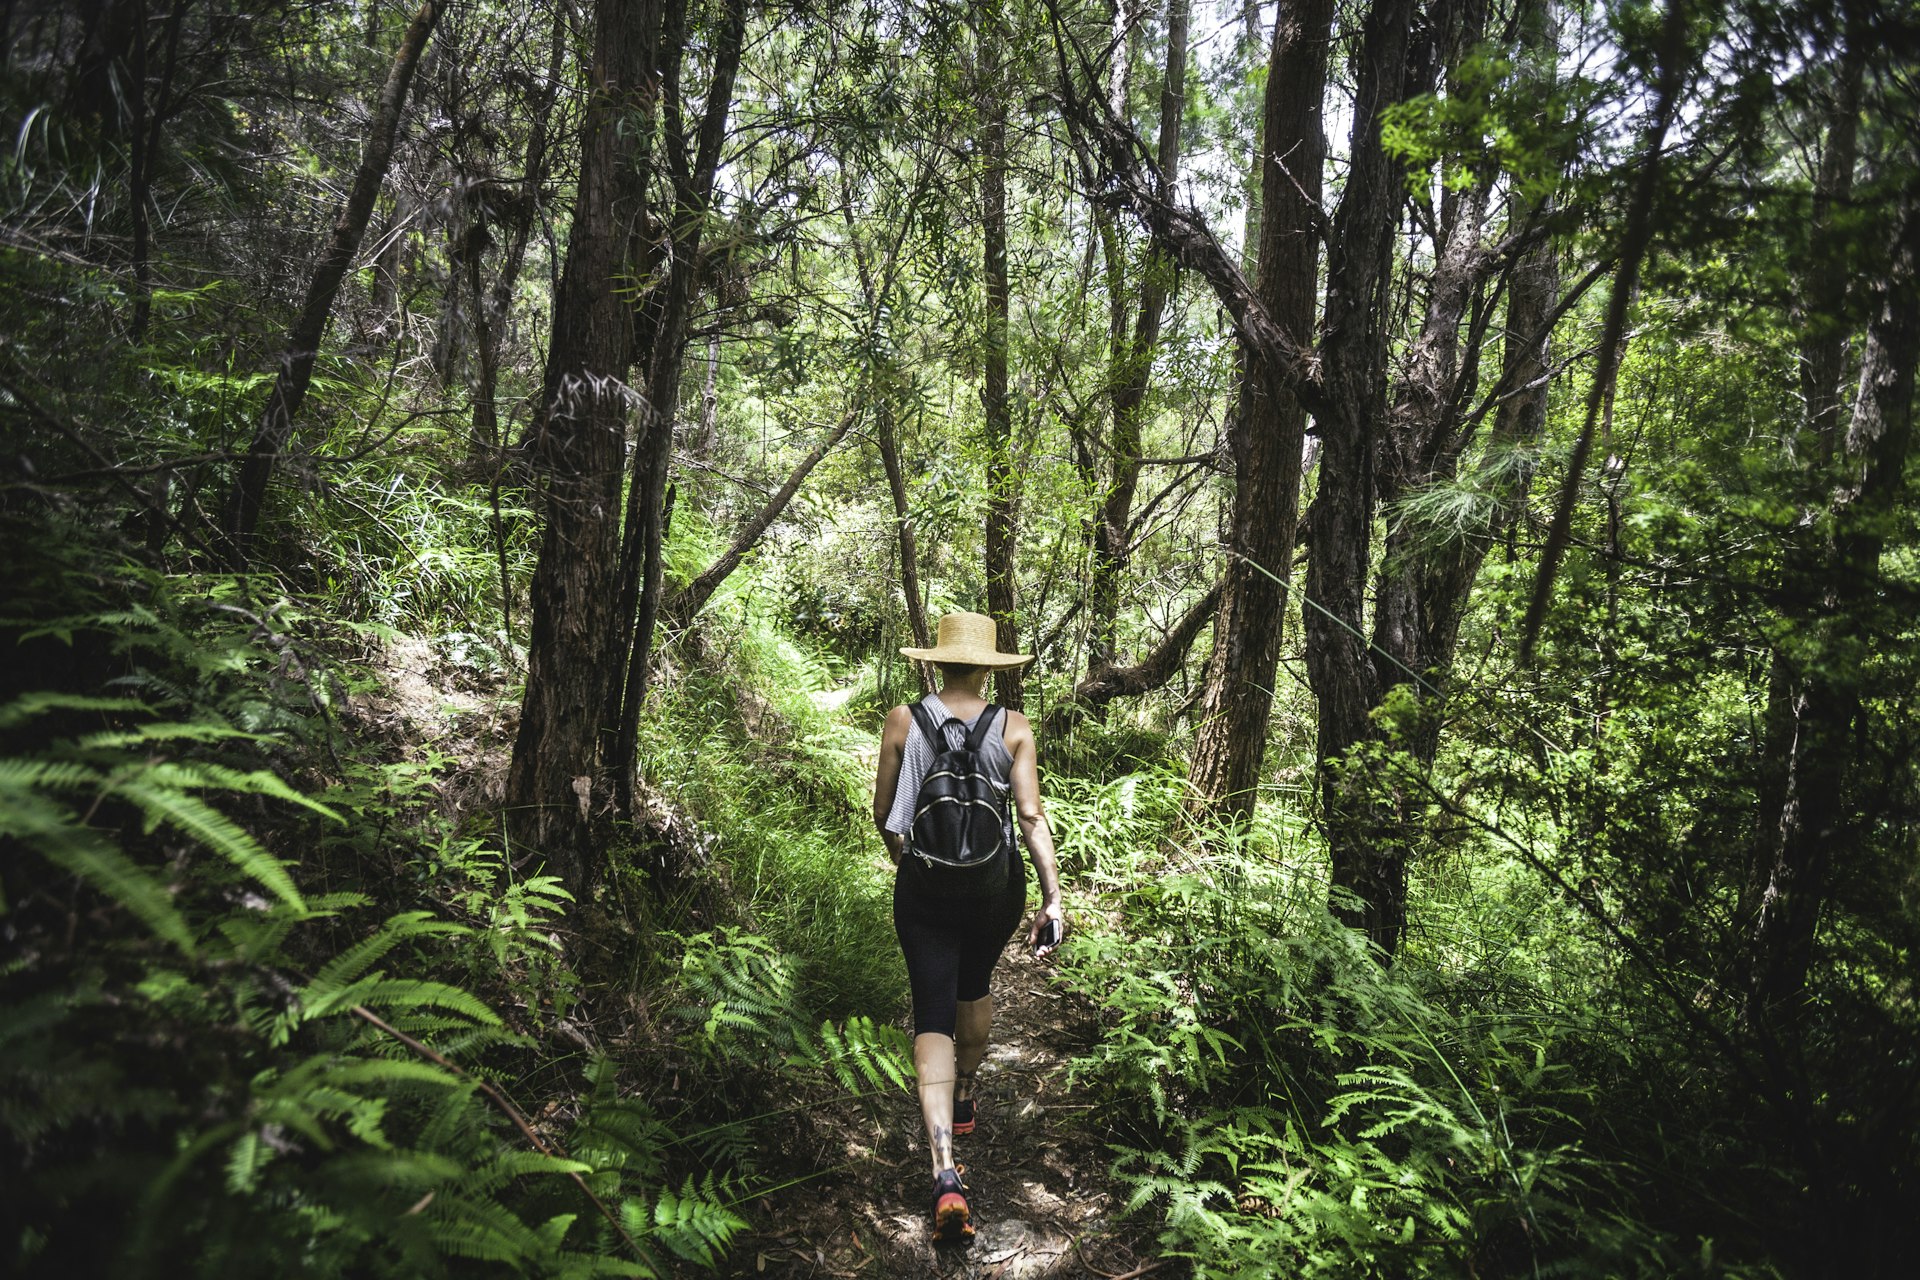 A woman is walking on a narrow trail through the undergrowth in Lamington National Park, Queenland.